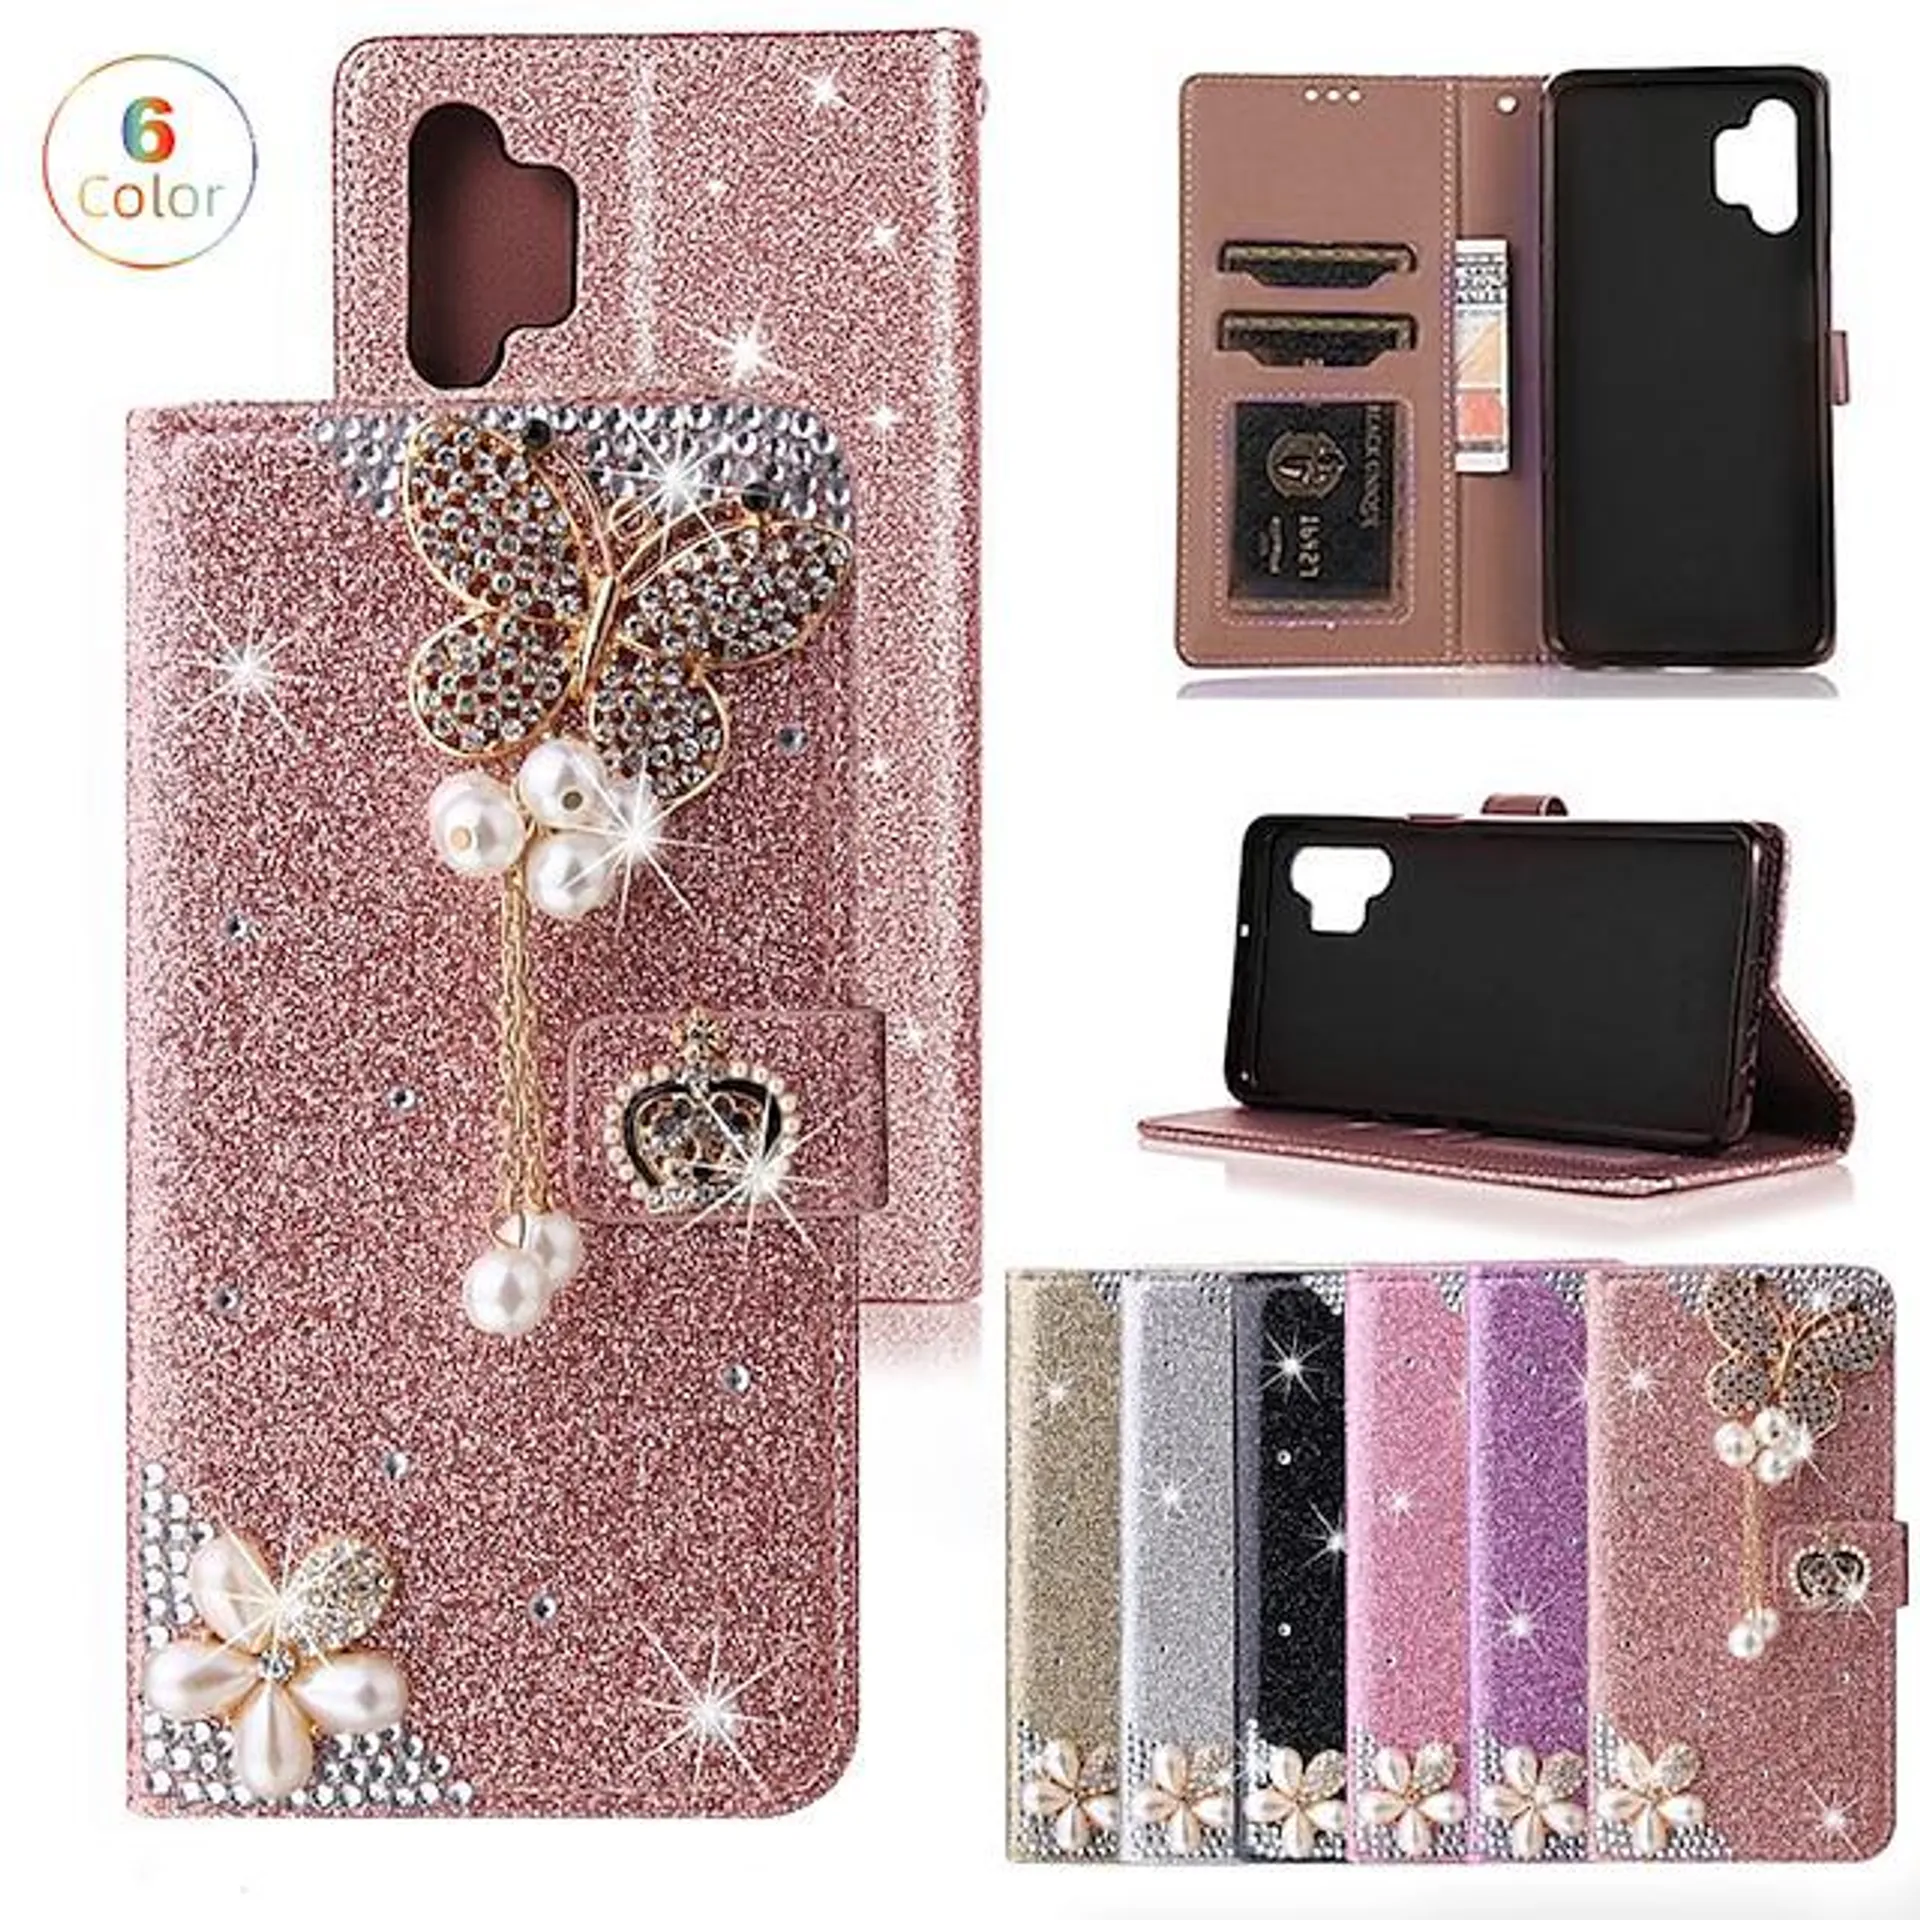 Phone Case For Samsung Galaxy S23 S22 S21 S20 Plus Ultra A14 A34 A54 A73 A53 A33 Note 20 10 Wallet Case Rhinestone With Card Holder Magnetic Flip Glitter Shine Crystal Diamond PU Leather